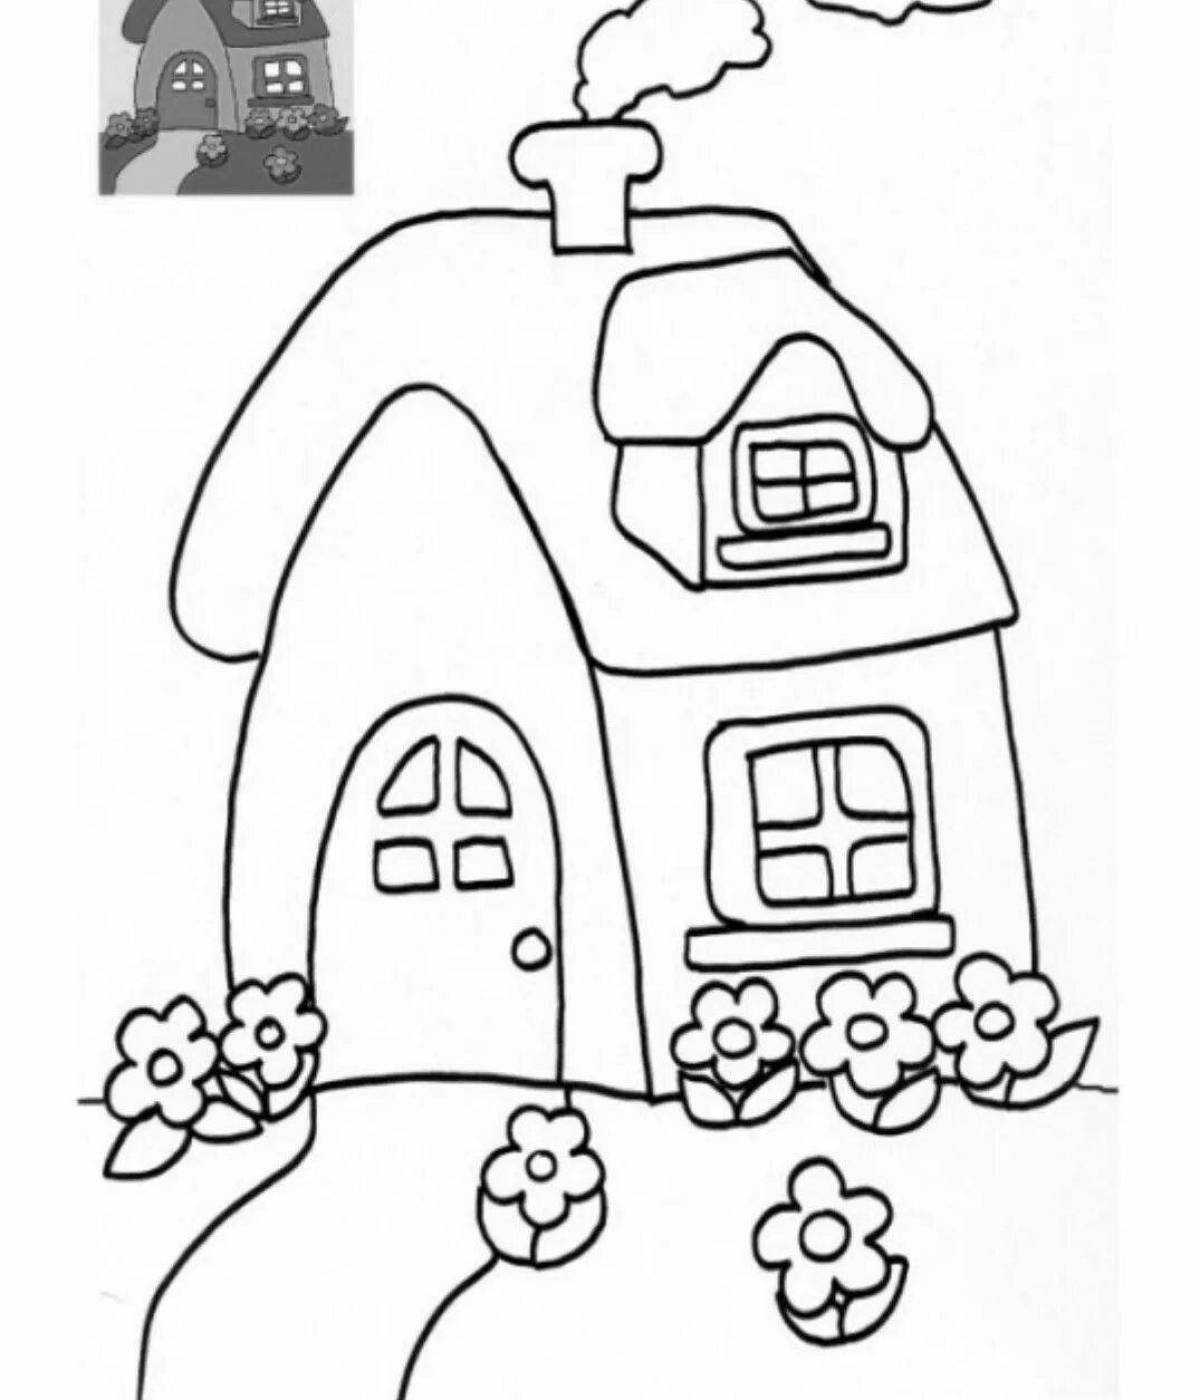 Coloring book wonderful house for children 4-5 years old